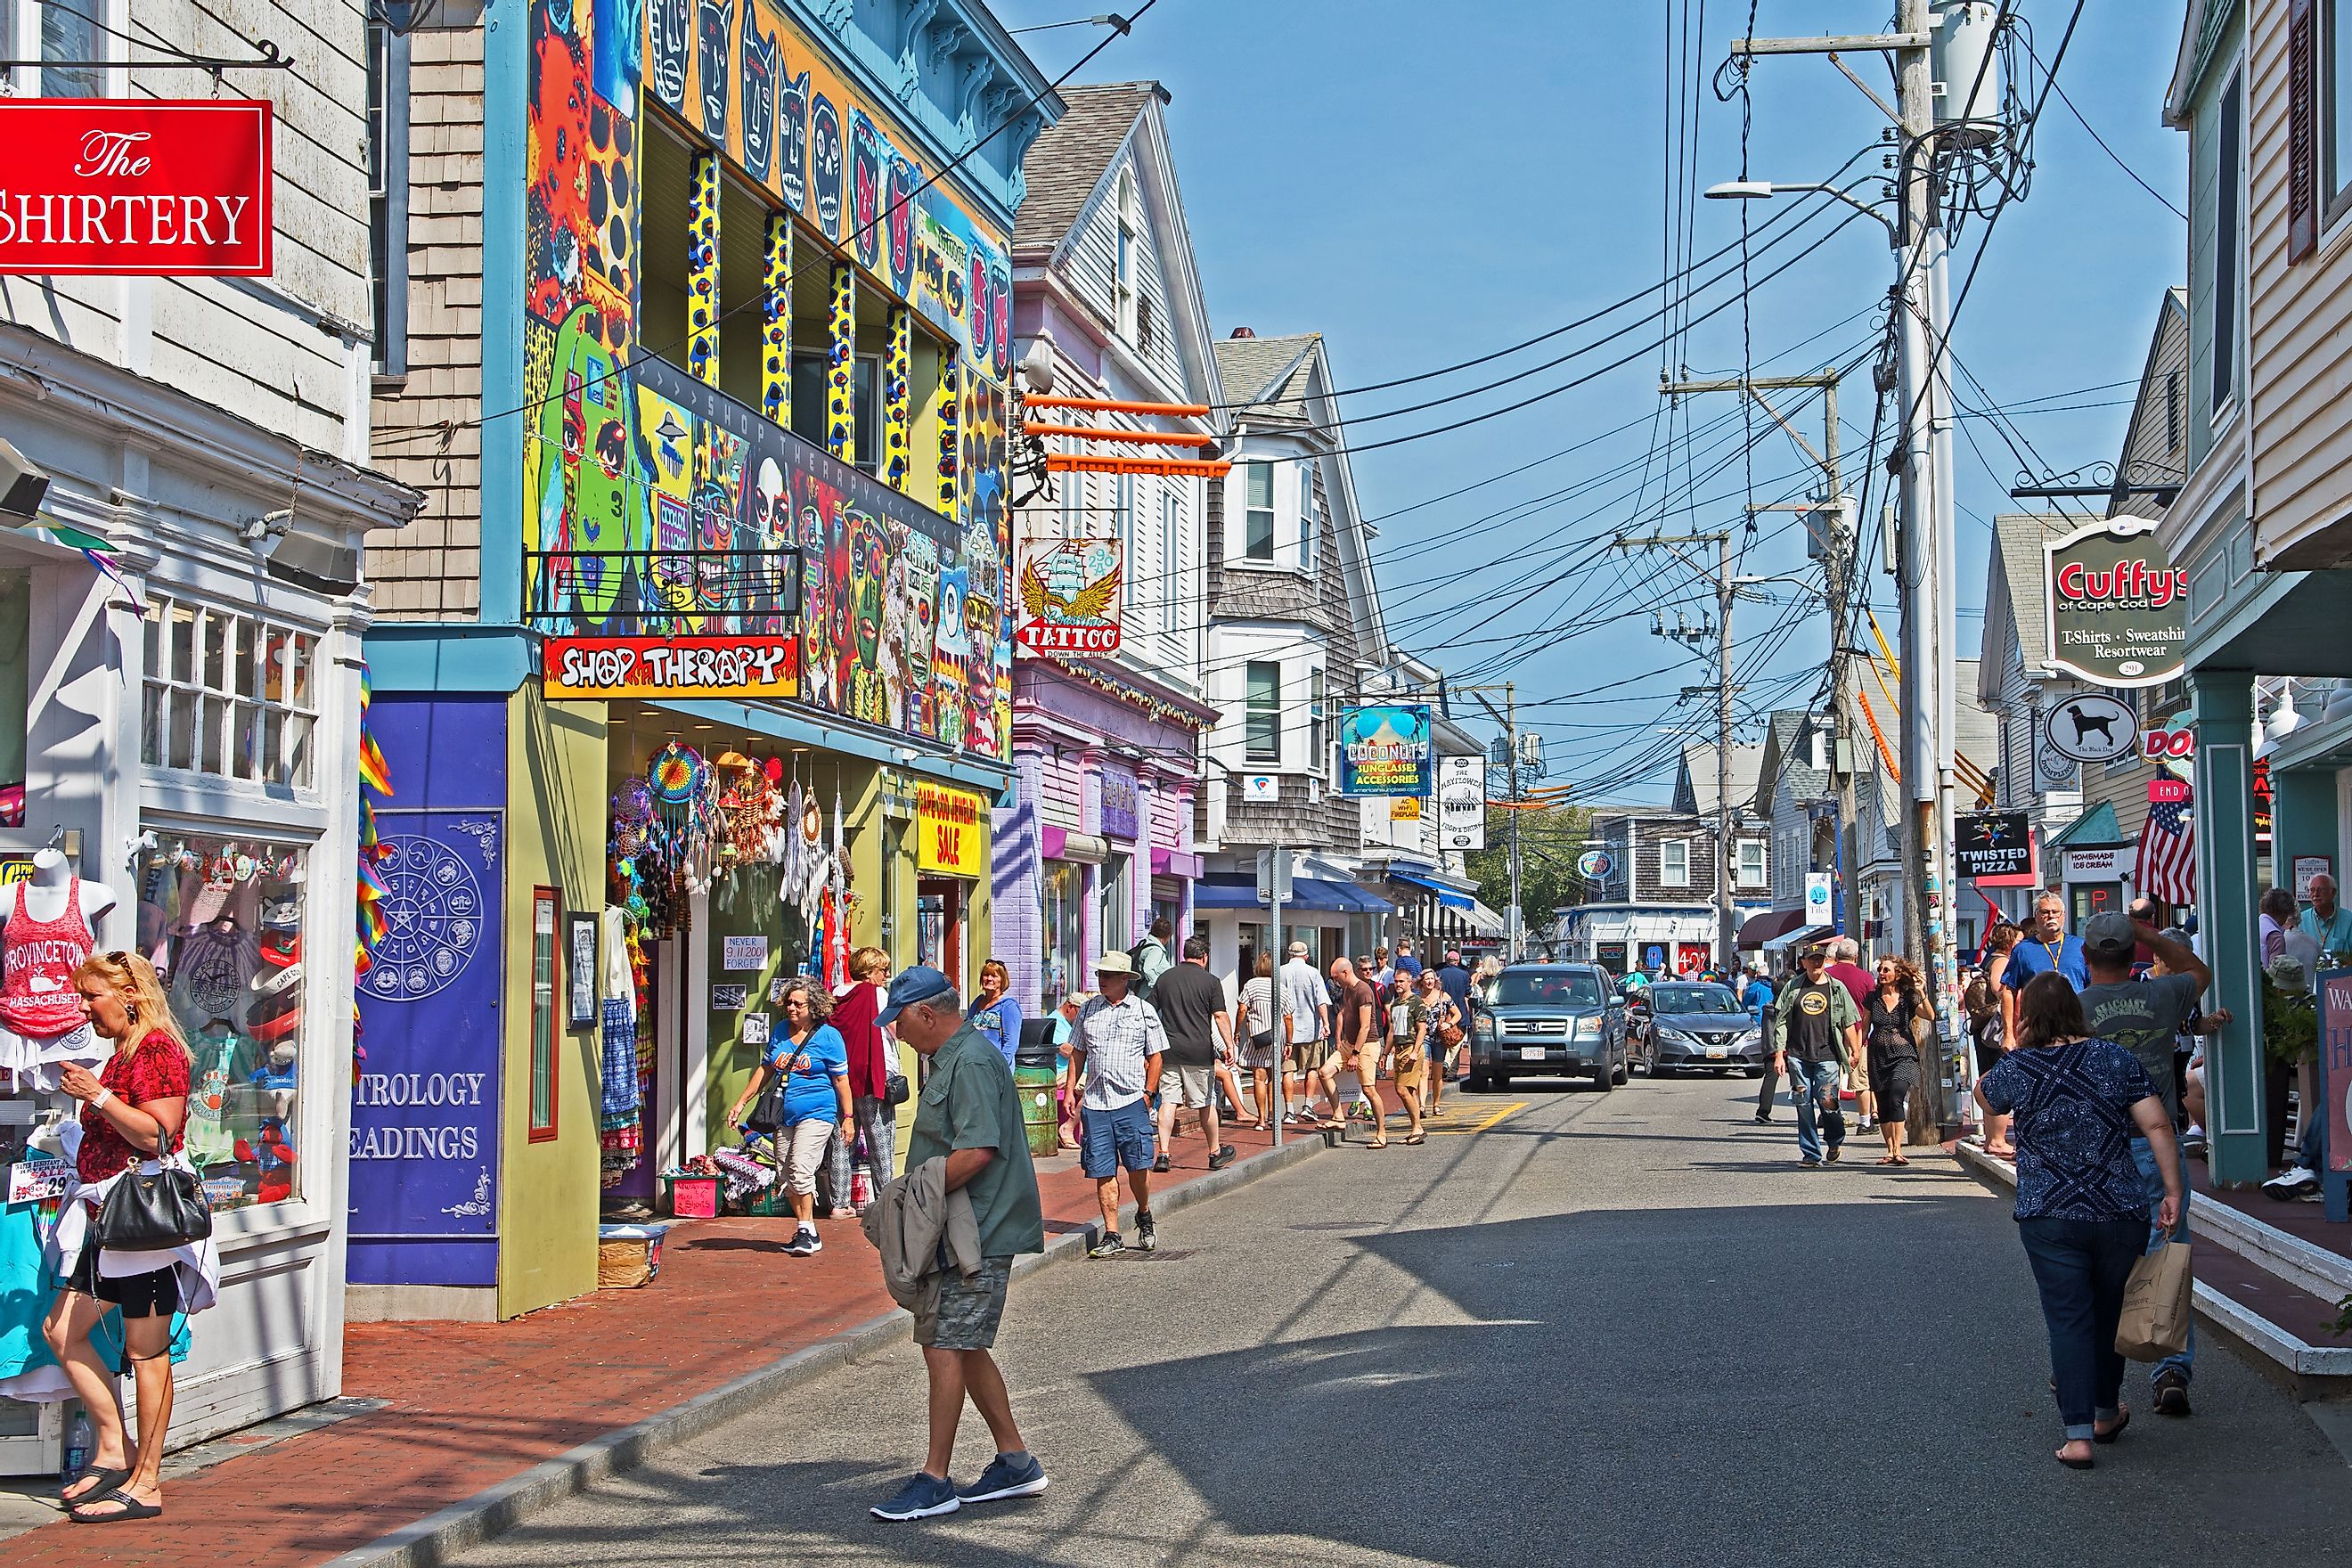 Commercial Street in Provincetown, Massachusetts, USA. Editorial credit: Mystic Stock Photography / Shutterstock.com